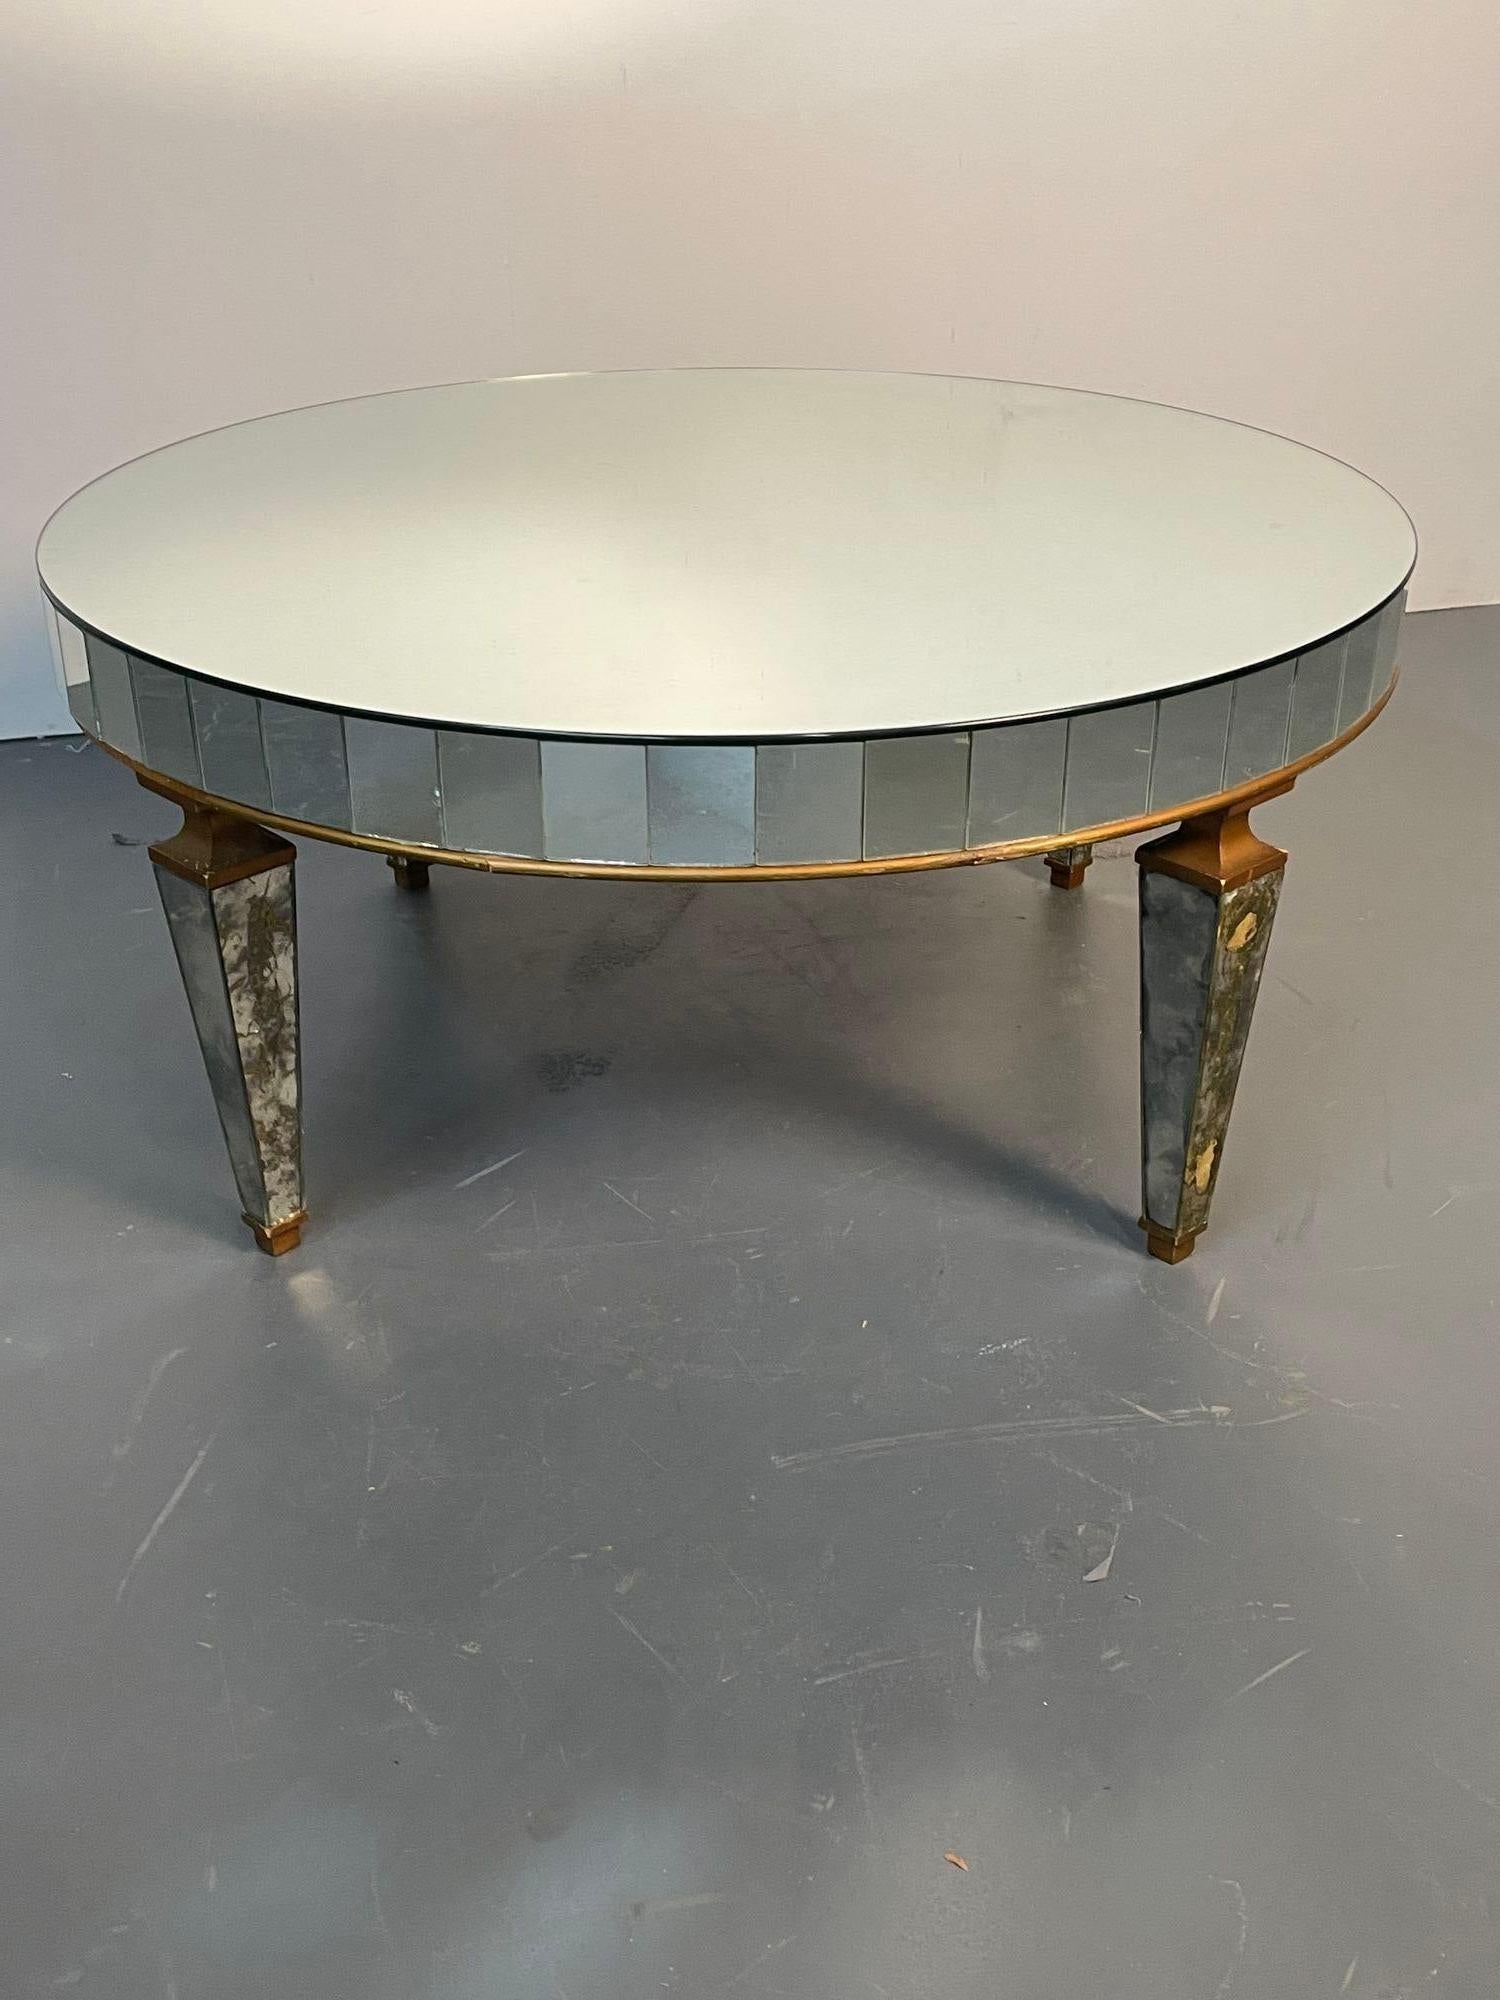 20th Century Art Deco Style Mirrored Circular Coffee / Cocktail / Low Table, Distressed For Sale